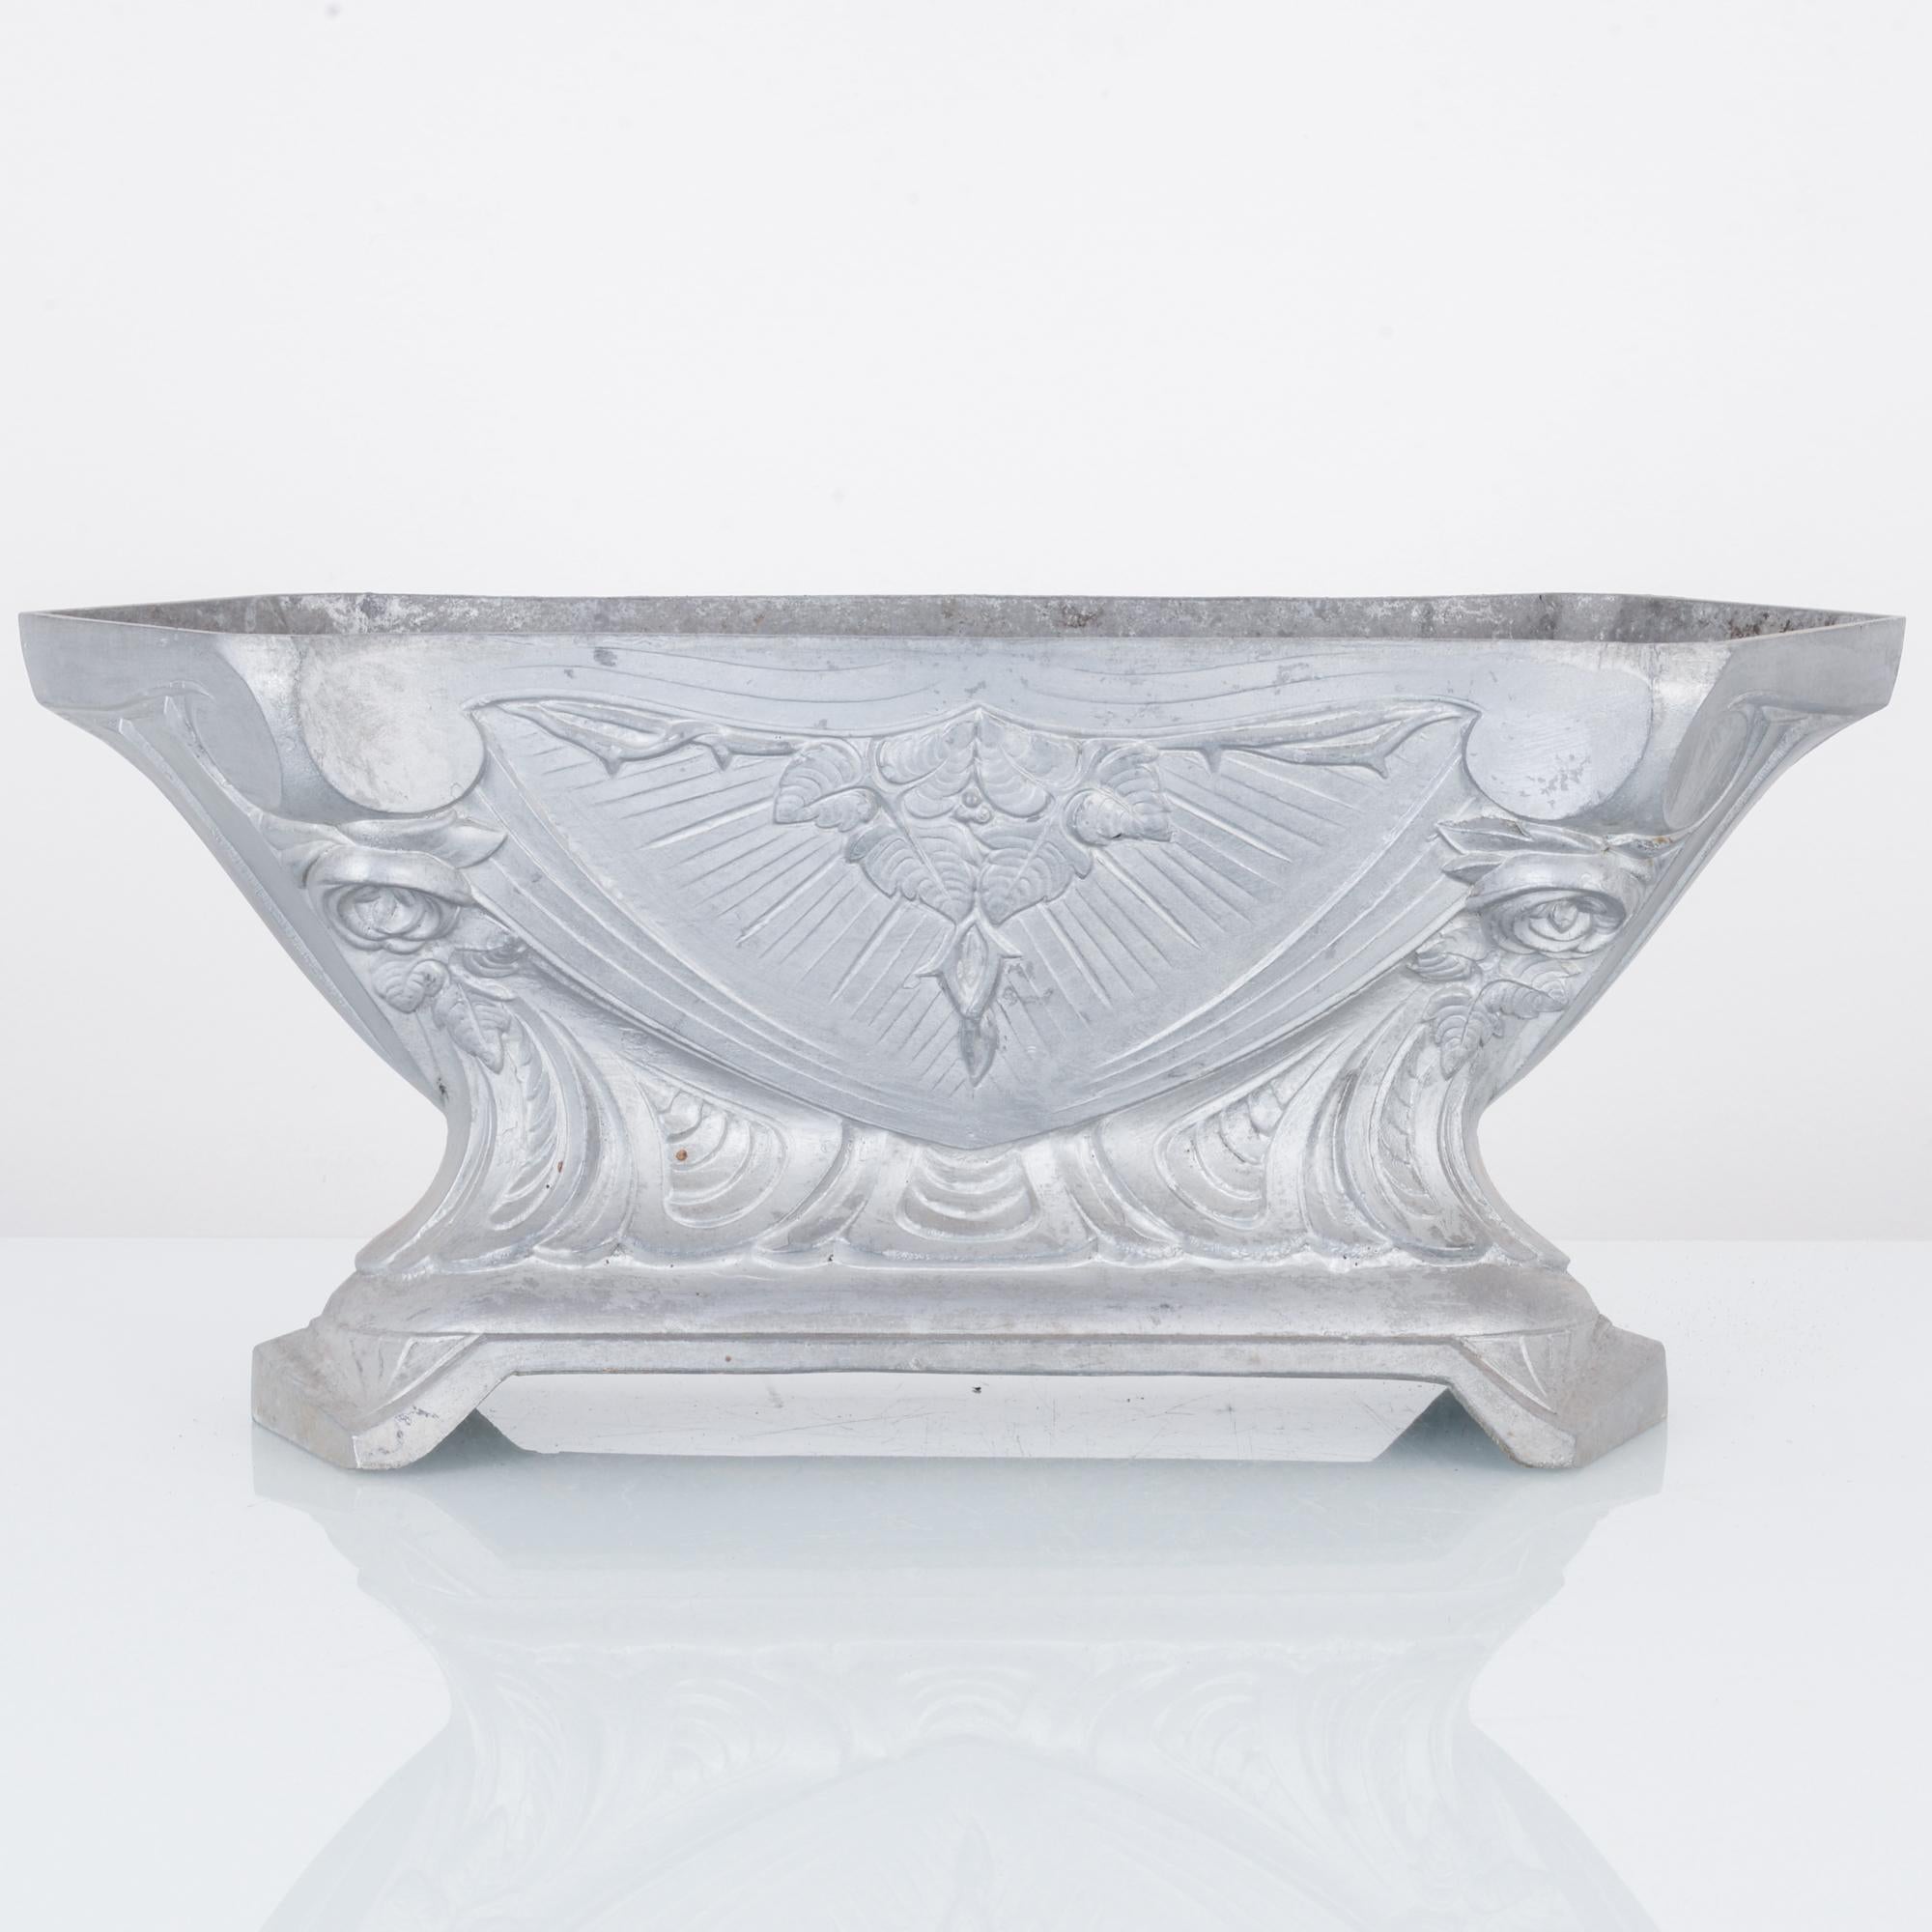 This cast aluminum planter was made in France, circa 1900. The details on its base and the elaborate design of flowers and leaves on its body give it a touch of elegance. The planter has a tapered body, widening toward the base. It displays a